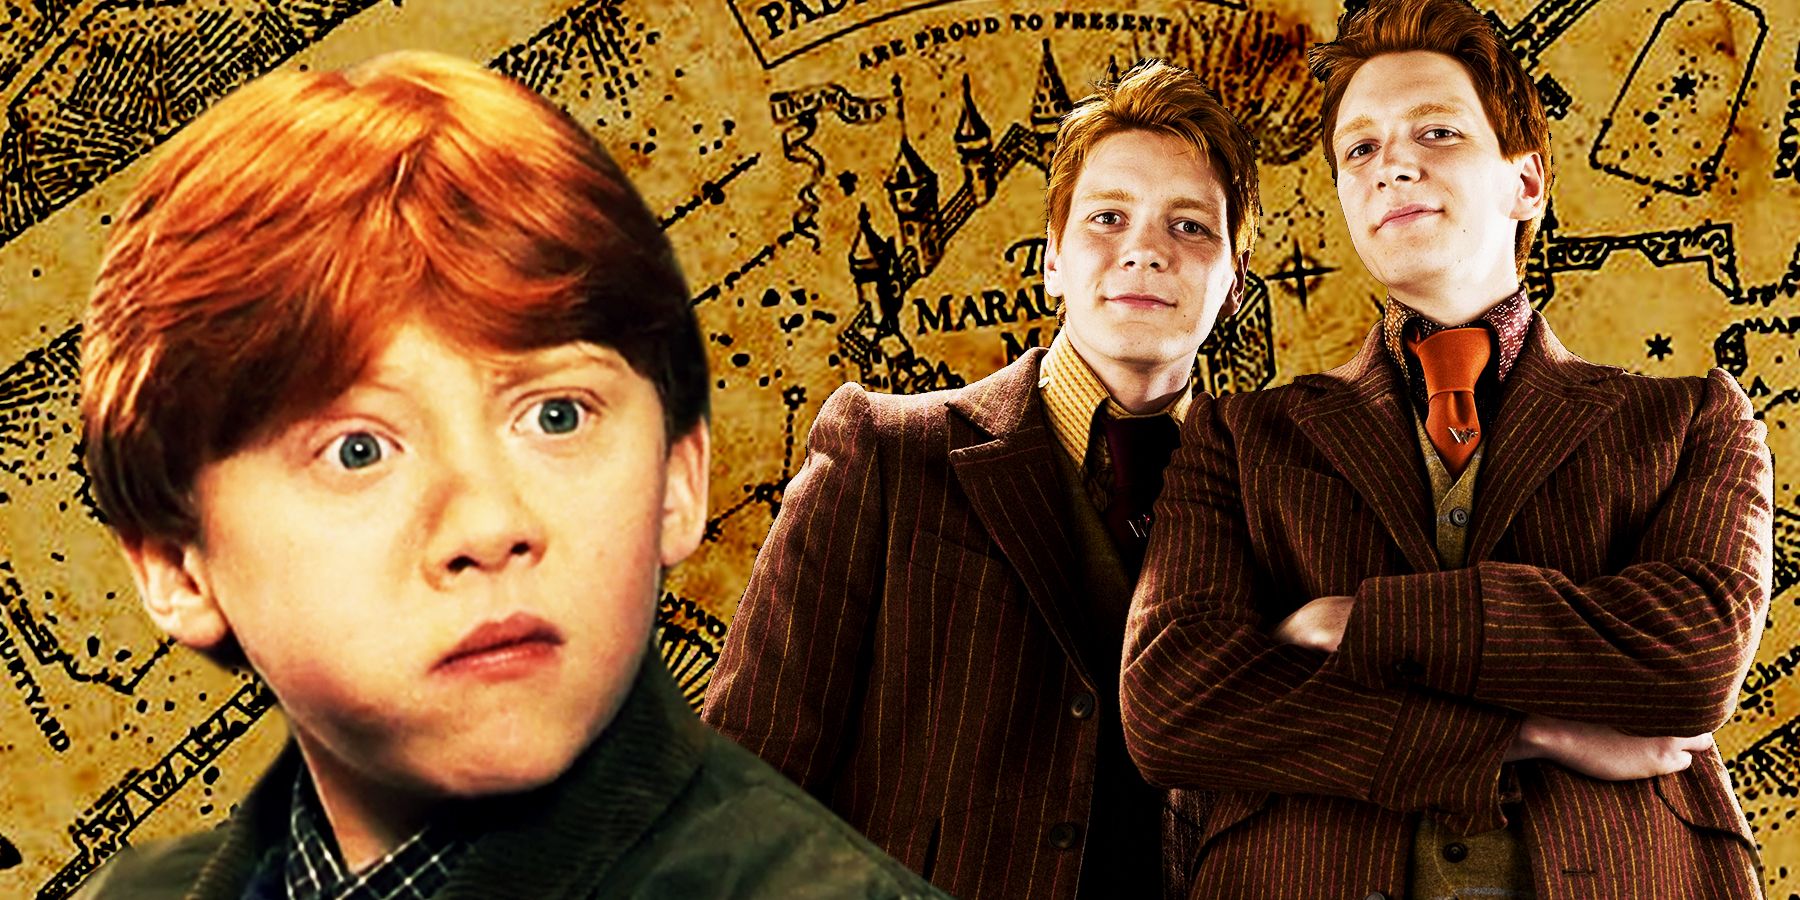 The Harry Potter Movies: A Guide to Fred and George Weasley's Pranks and Humor